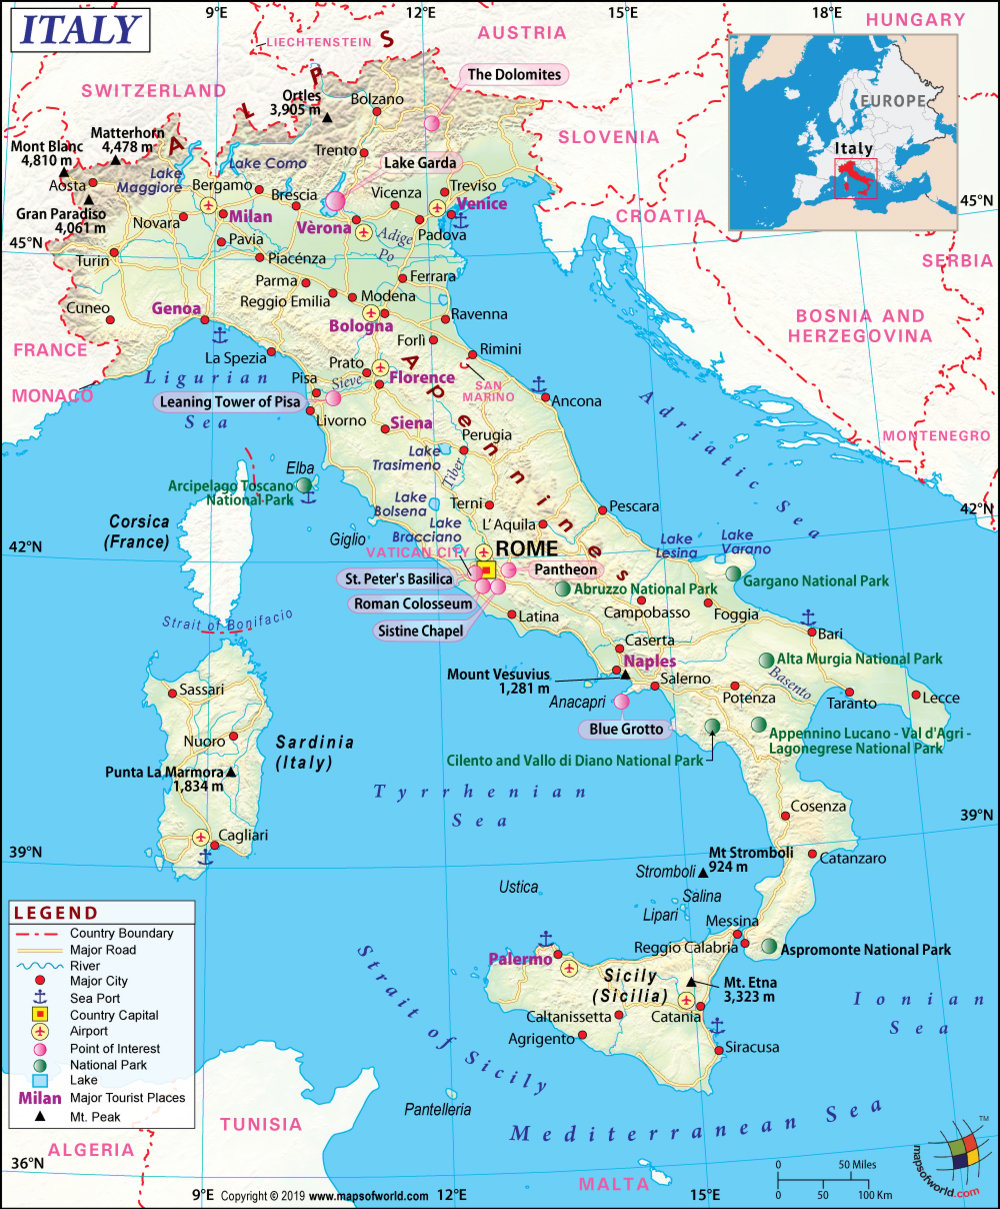 map of italy and france